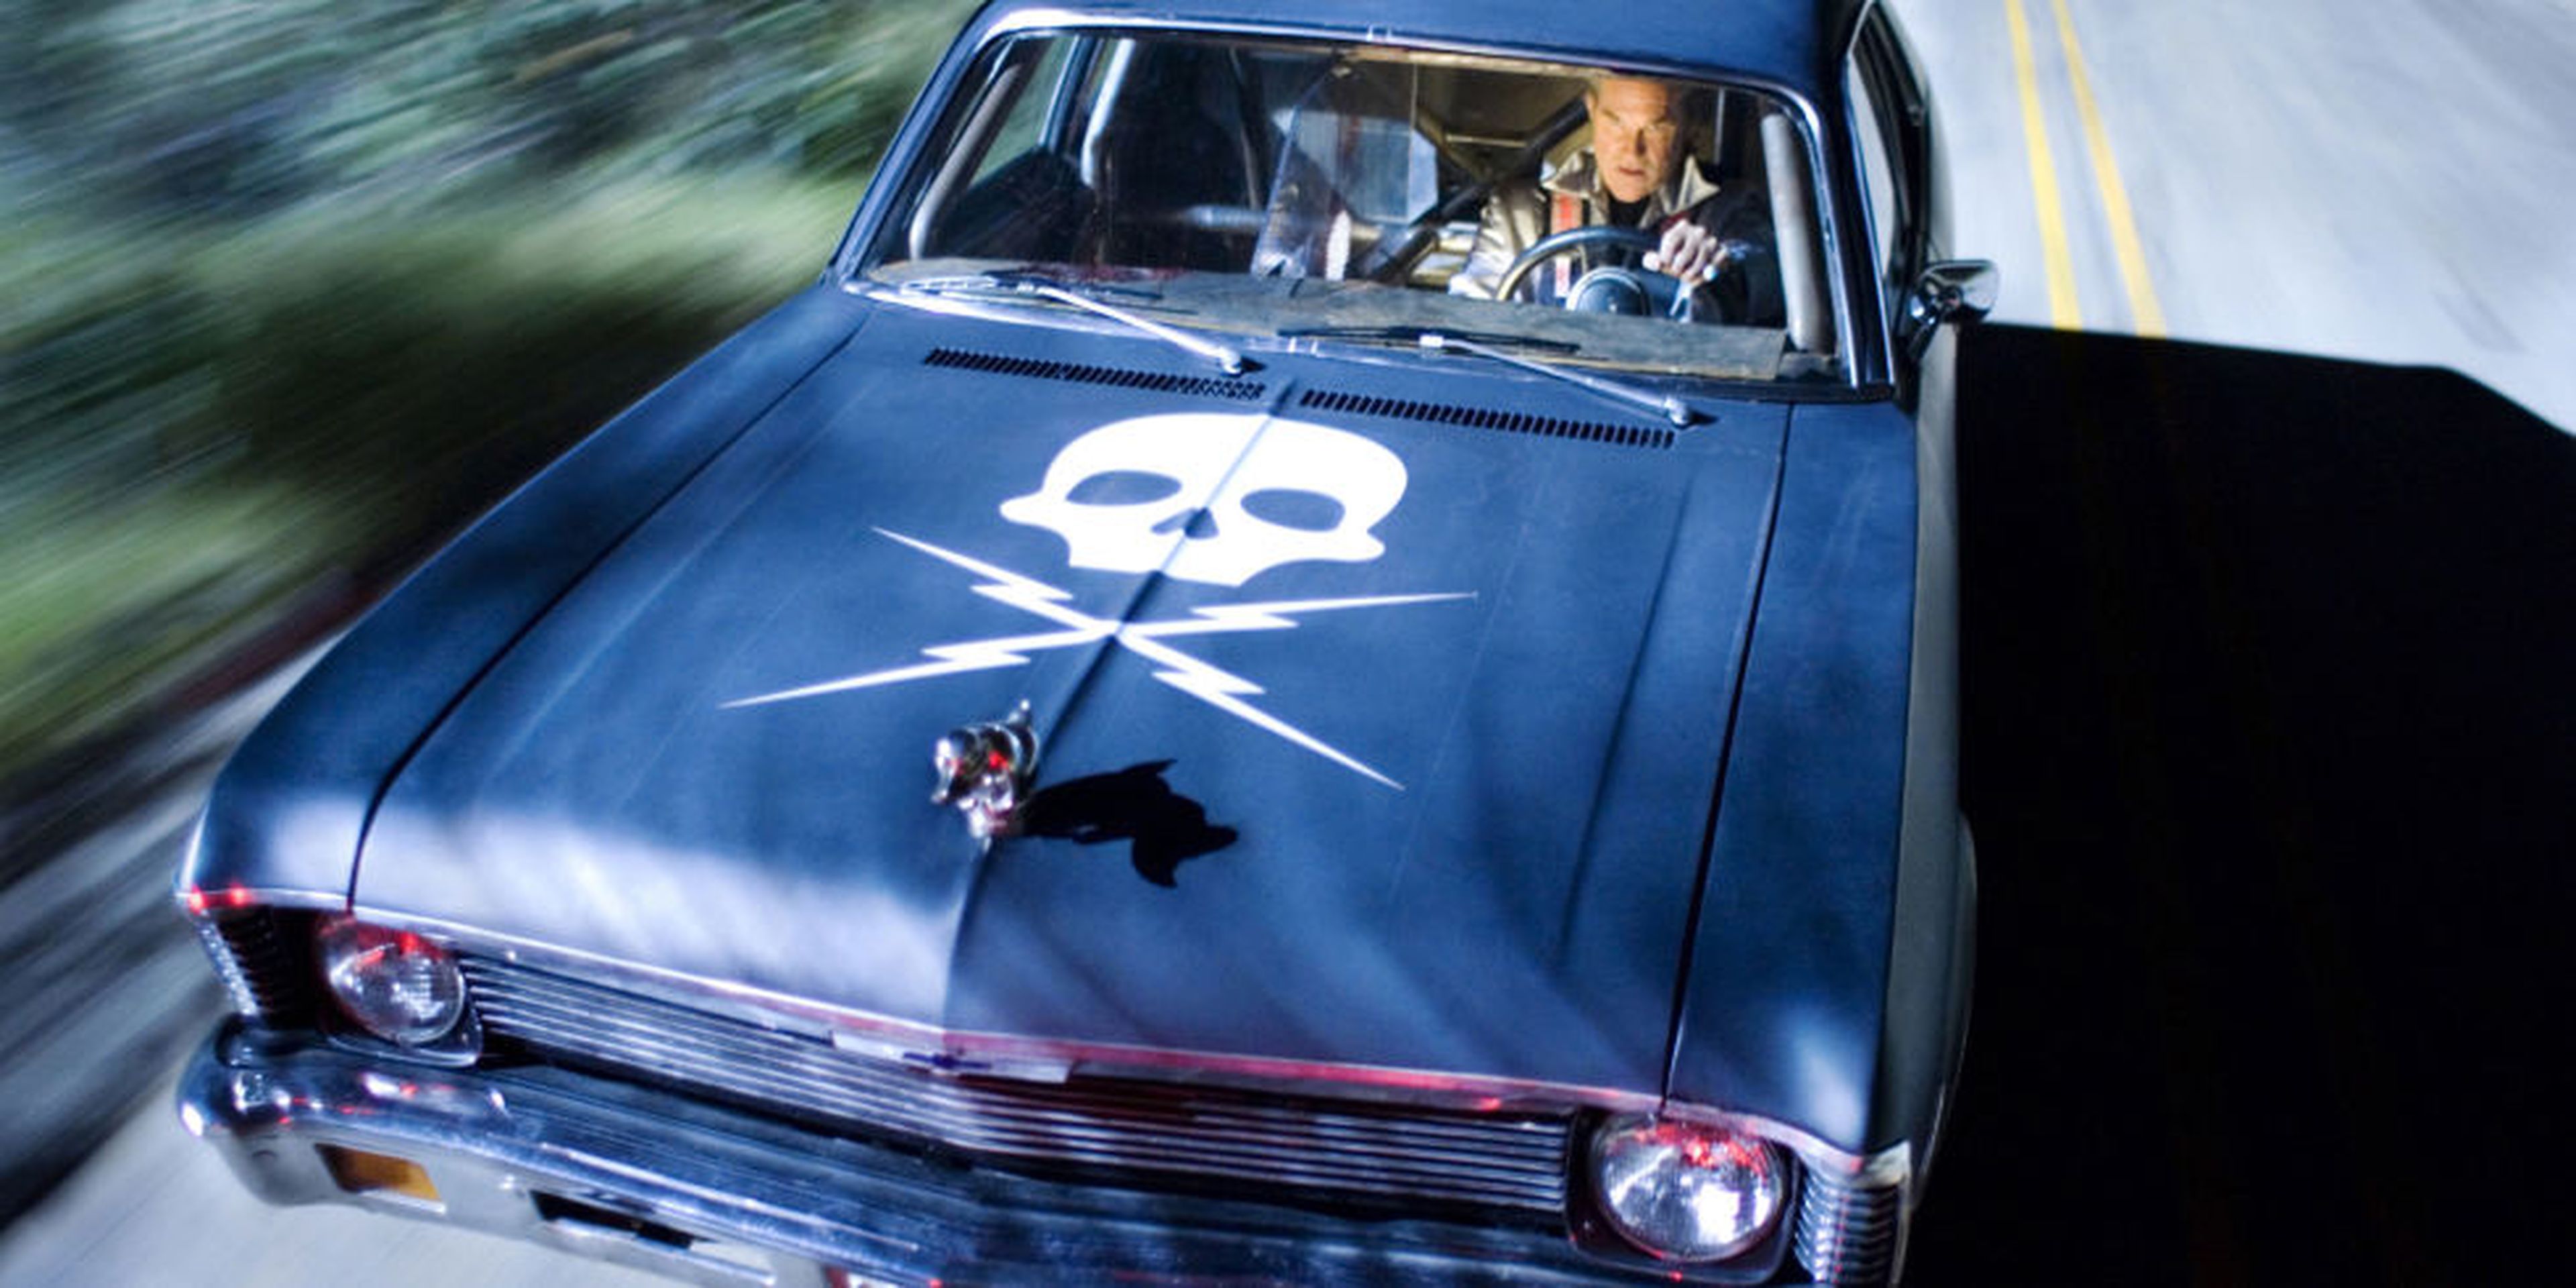 2. Death Proof (2007)